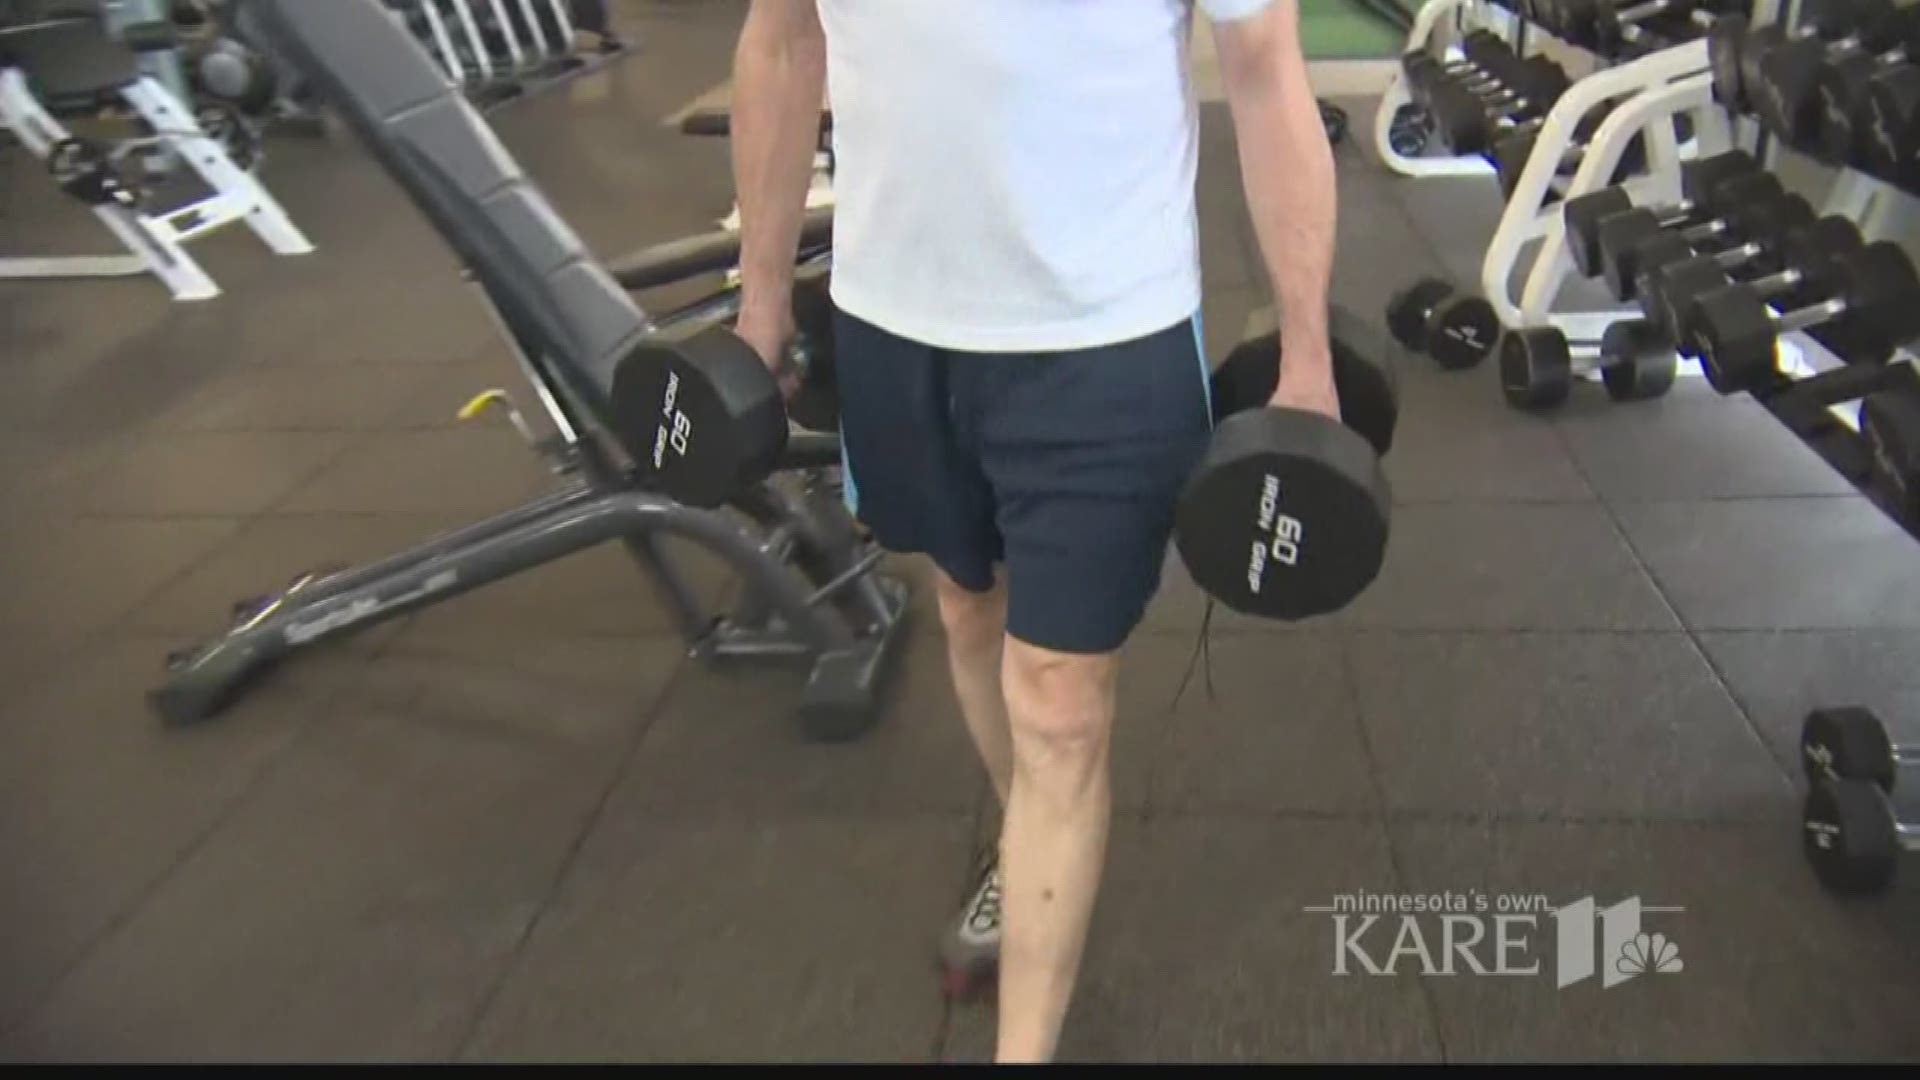 Dr. Larry Richmond says men start losing muscle mass in their 30s. He says, as those muscle fade, it can lead to weakness and an increased risk of injury. http://kare11.tv/2x2qAAf